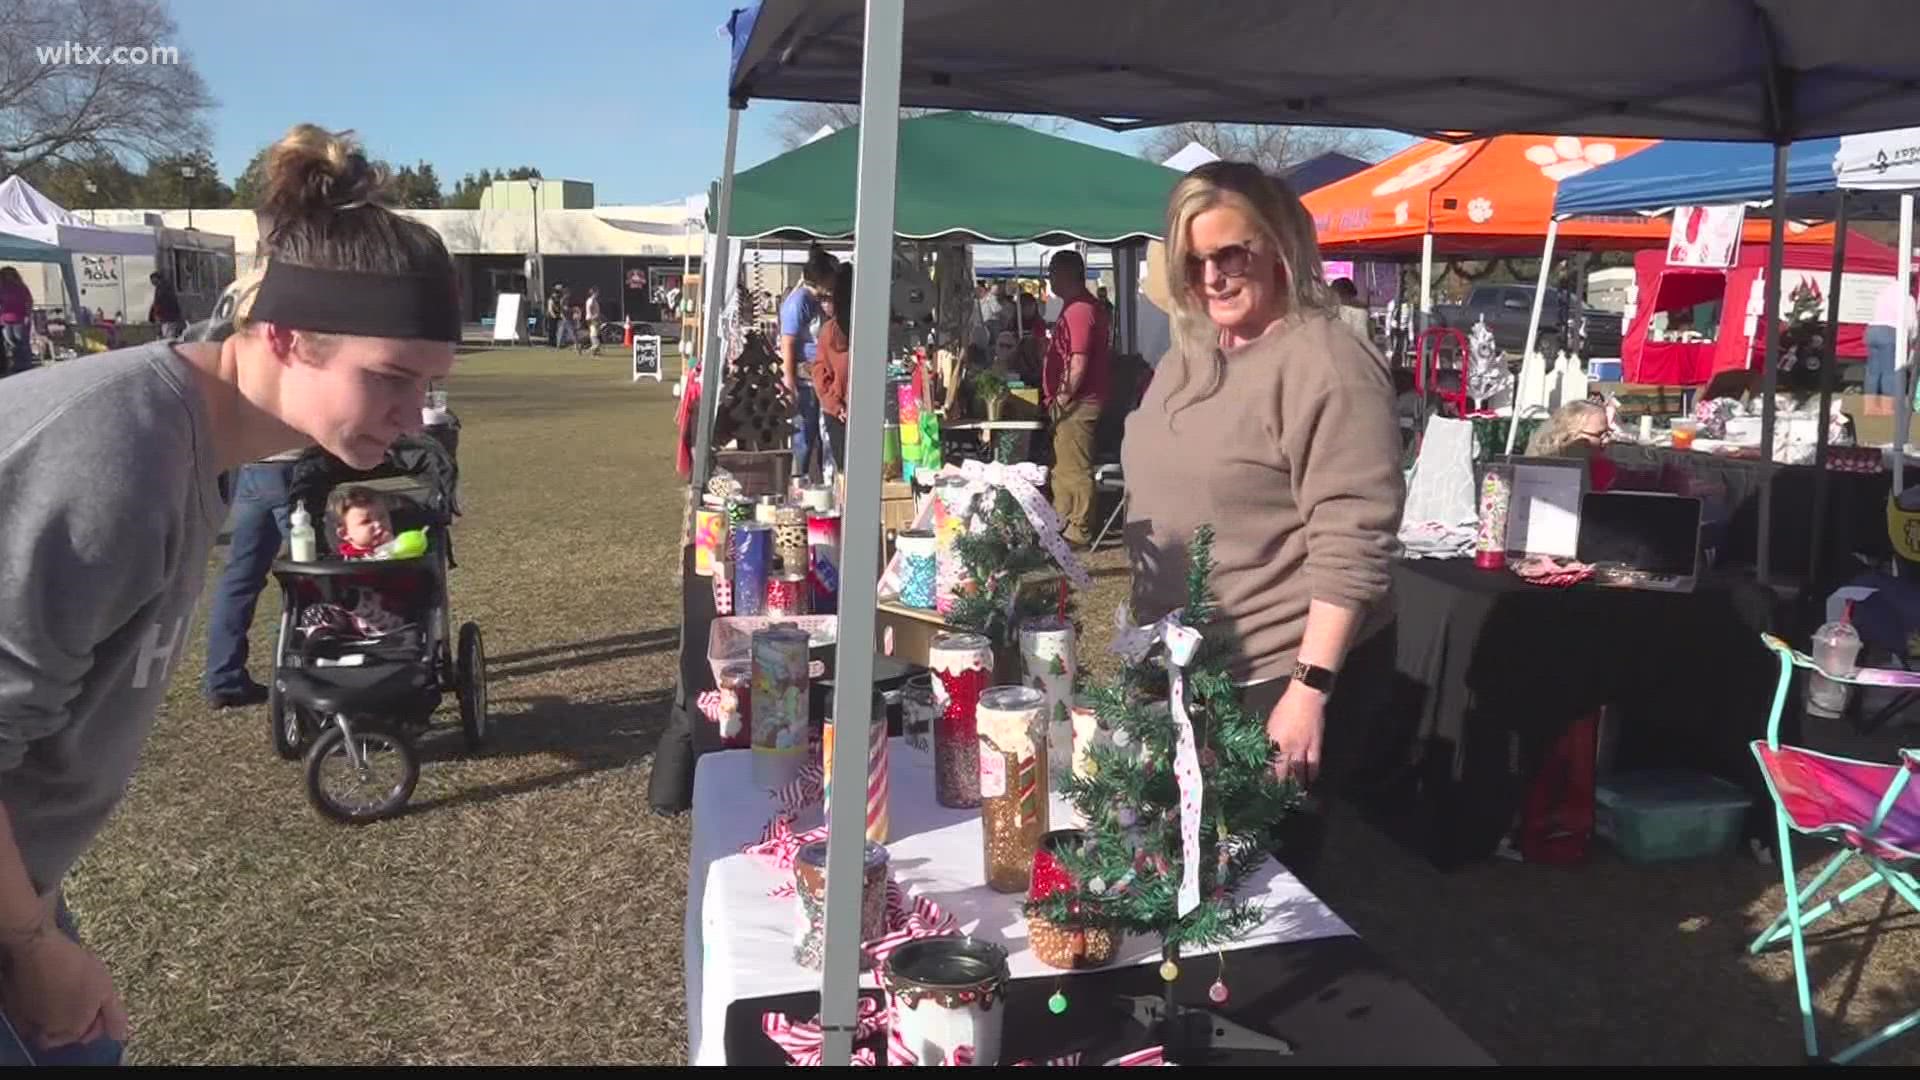 Supporting local businesses this holiday season -- that's what many did at the Sumter Holiday Market on Friday.